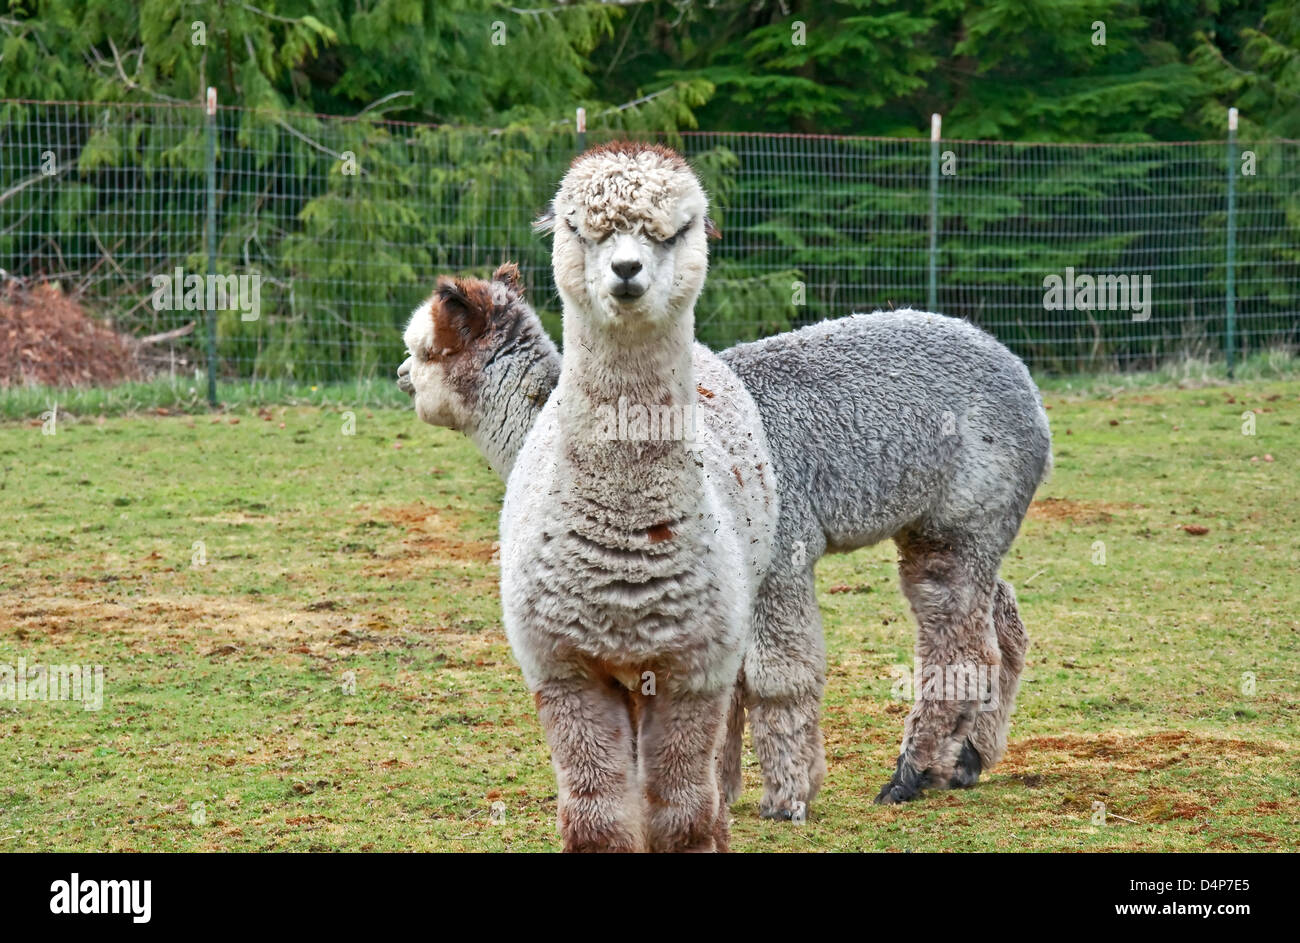 Huacaya alpacas in a rural setting. One is facing the camera straight on, with ears back, clearly unhappy. Stock Photo